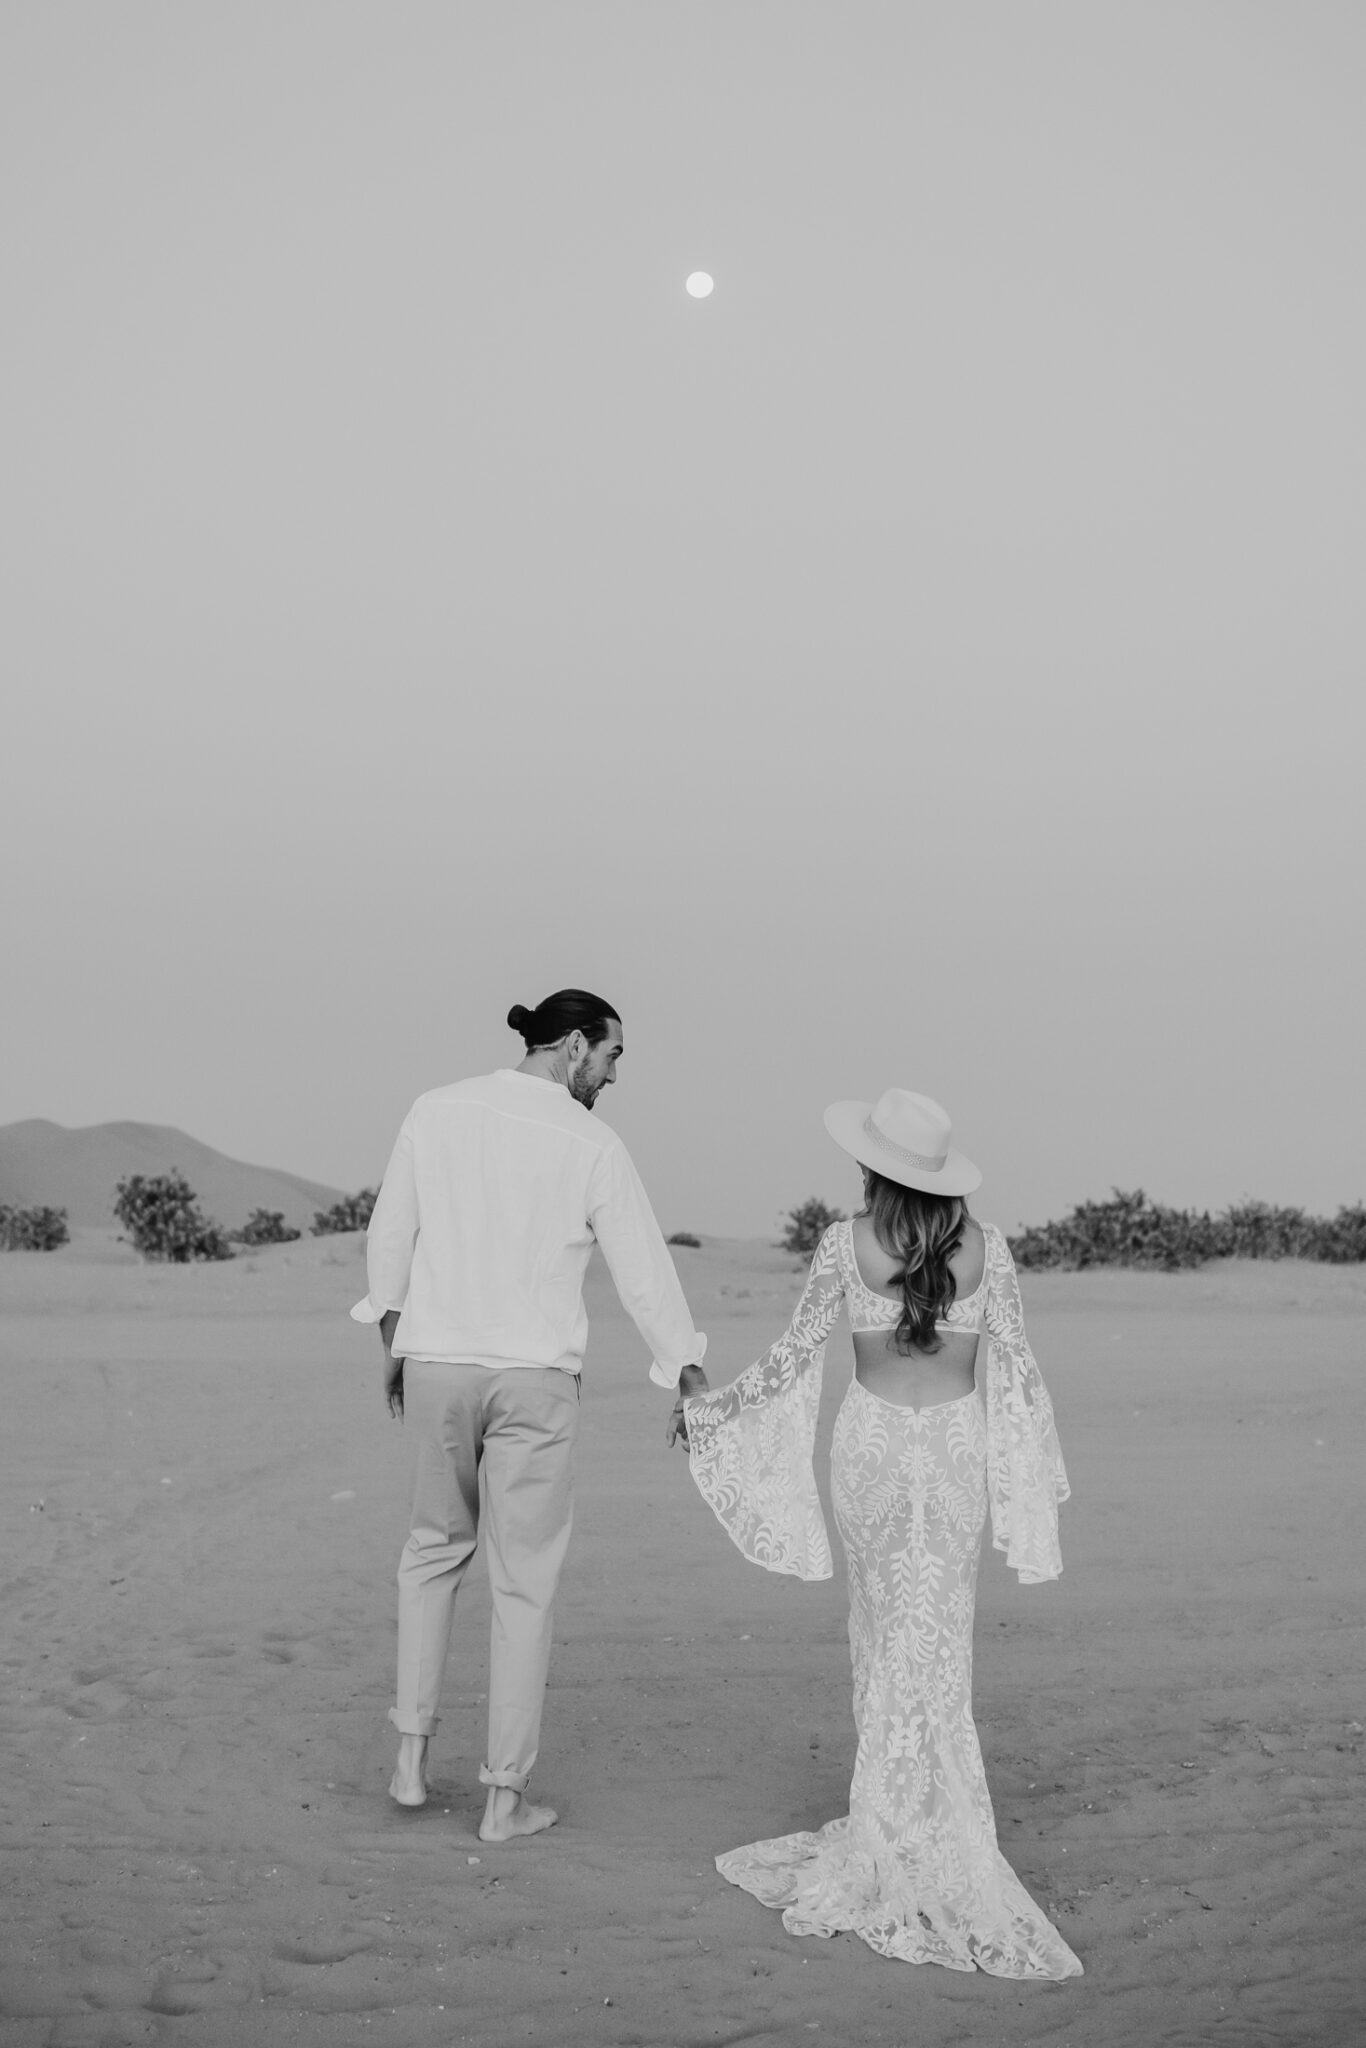 Couple holding hands walking through the desert, woman wearing boho inspired lace gown from The Wild Love Collective.